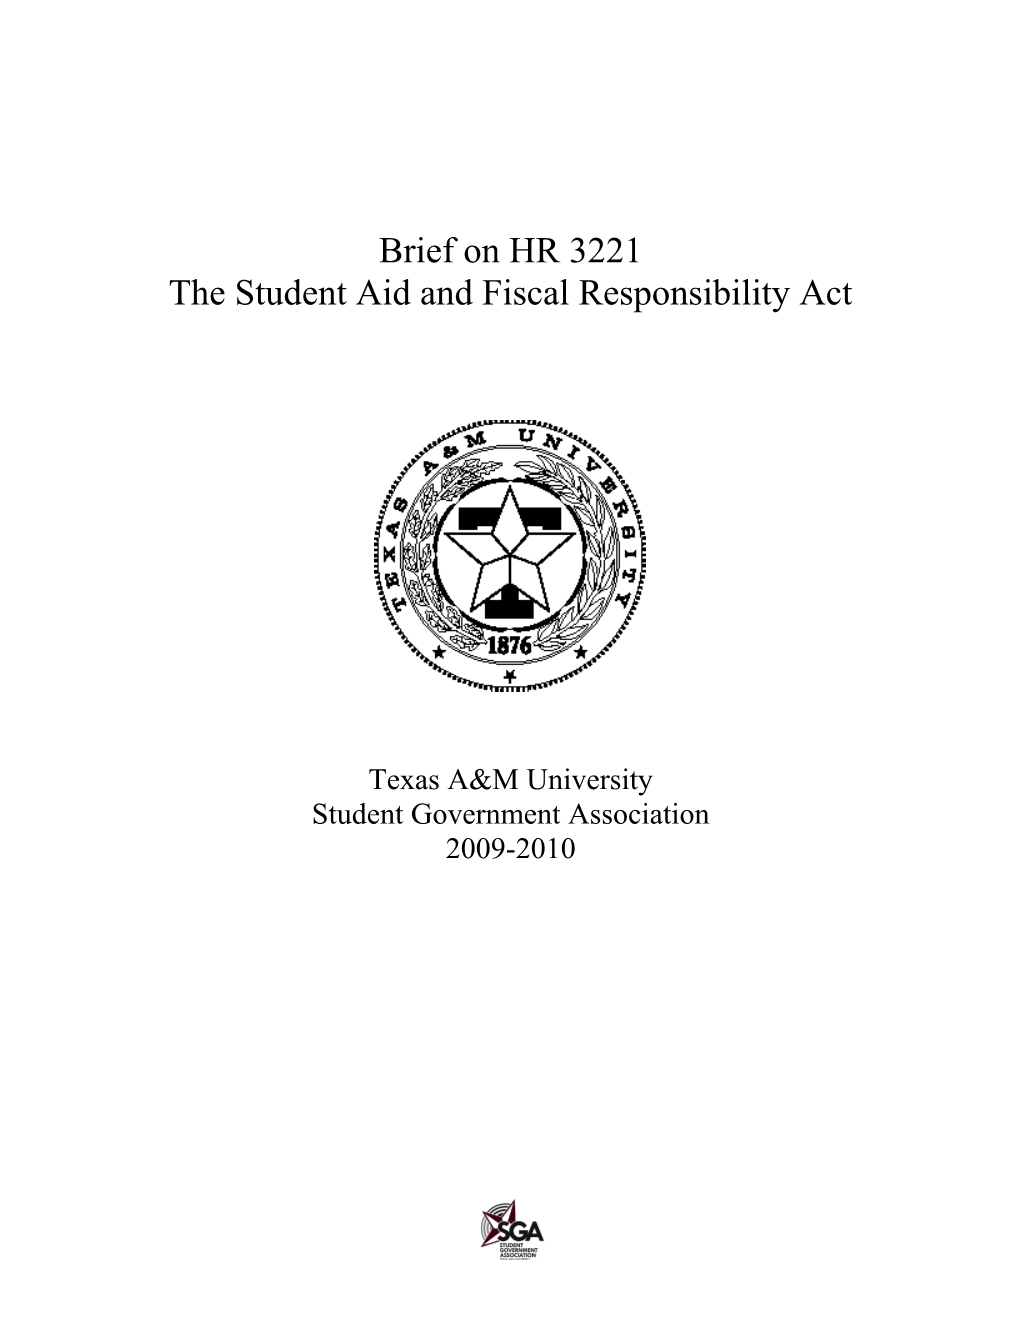 The Student Aid and Fiscal Responsibility Act